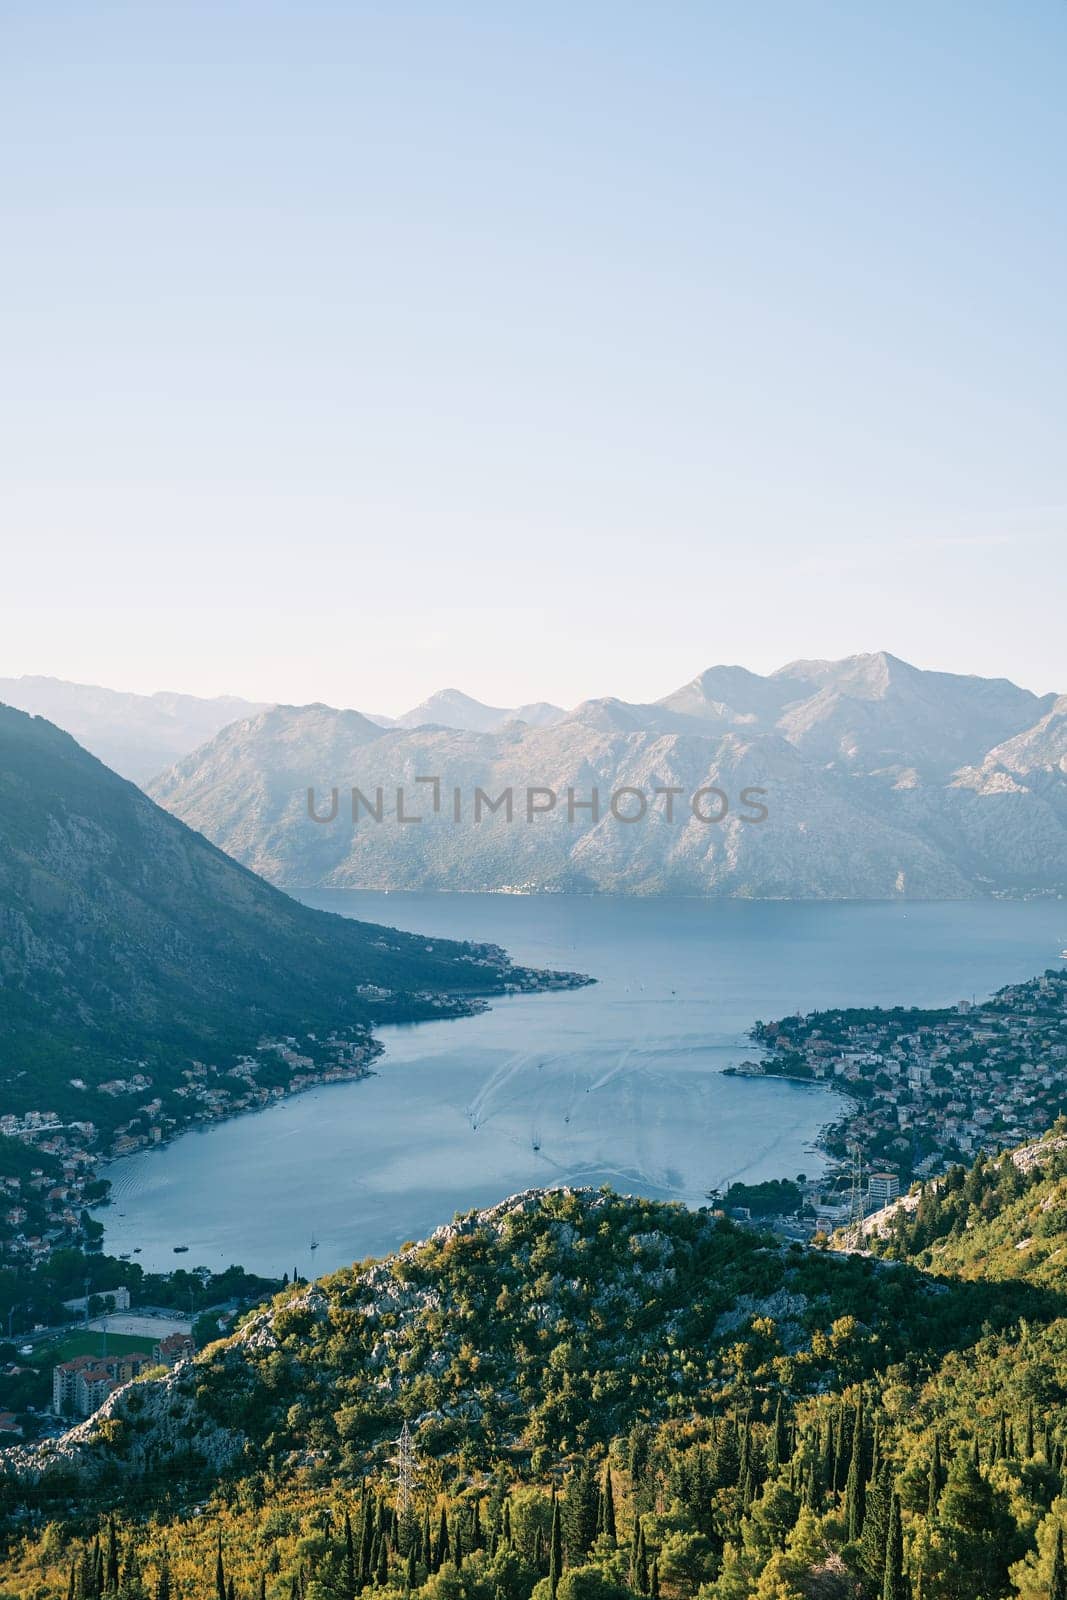 View from a green wooded mountain to the Bay of Kotor, surrounded by mountains. Montenegro. High quality photo